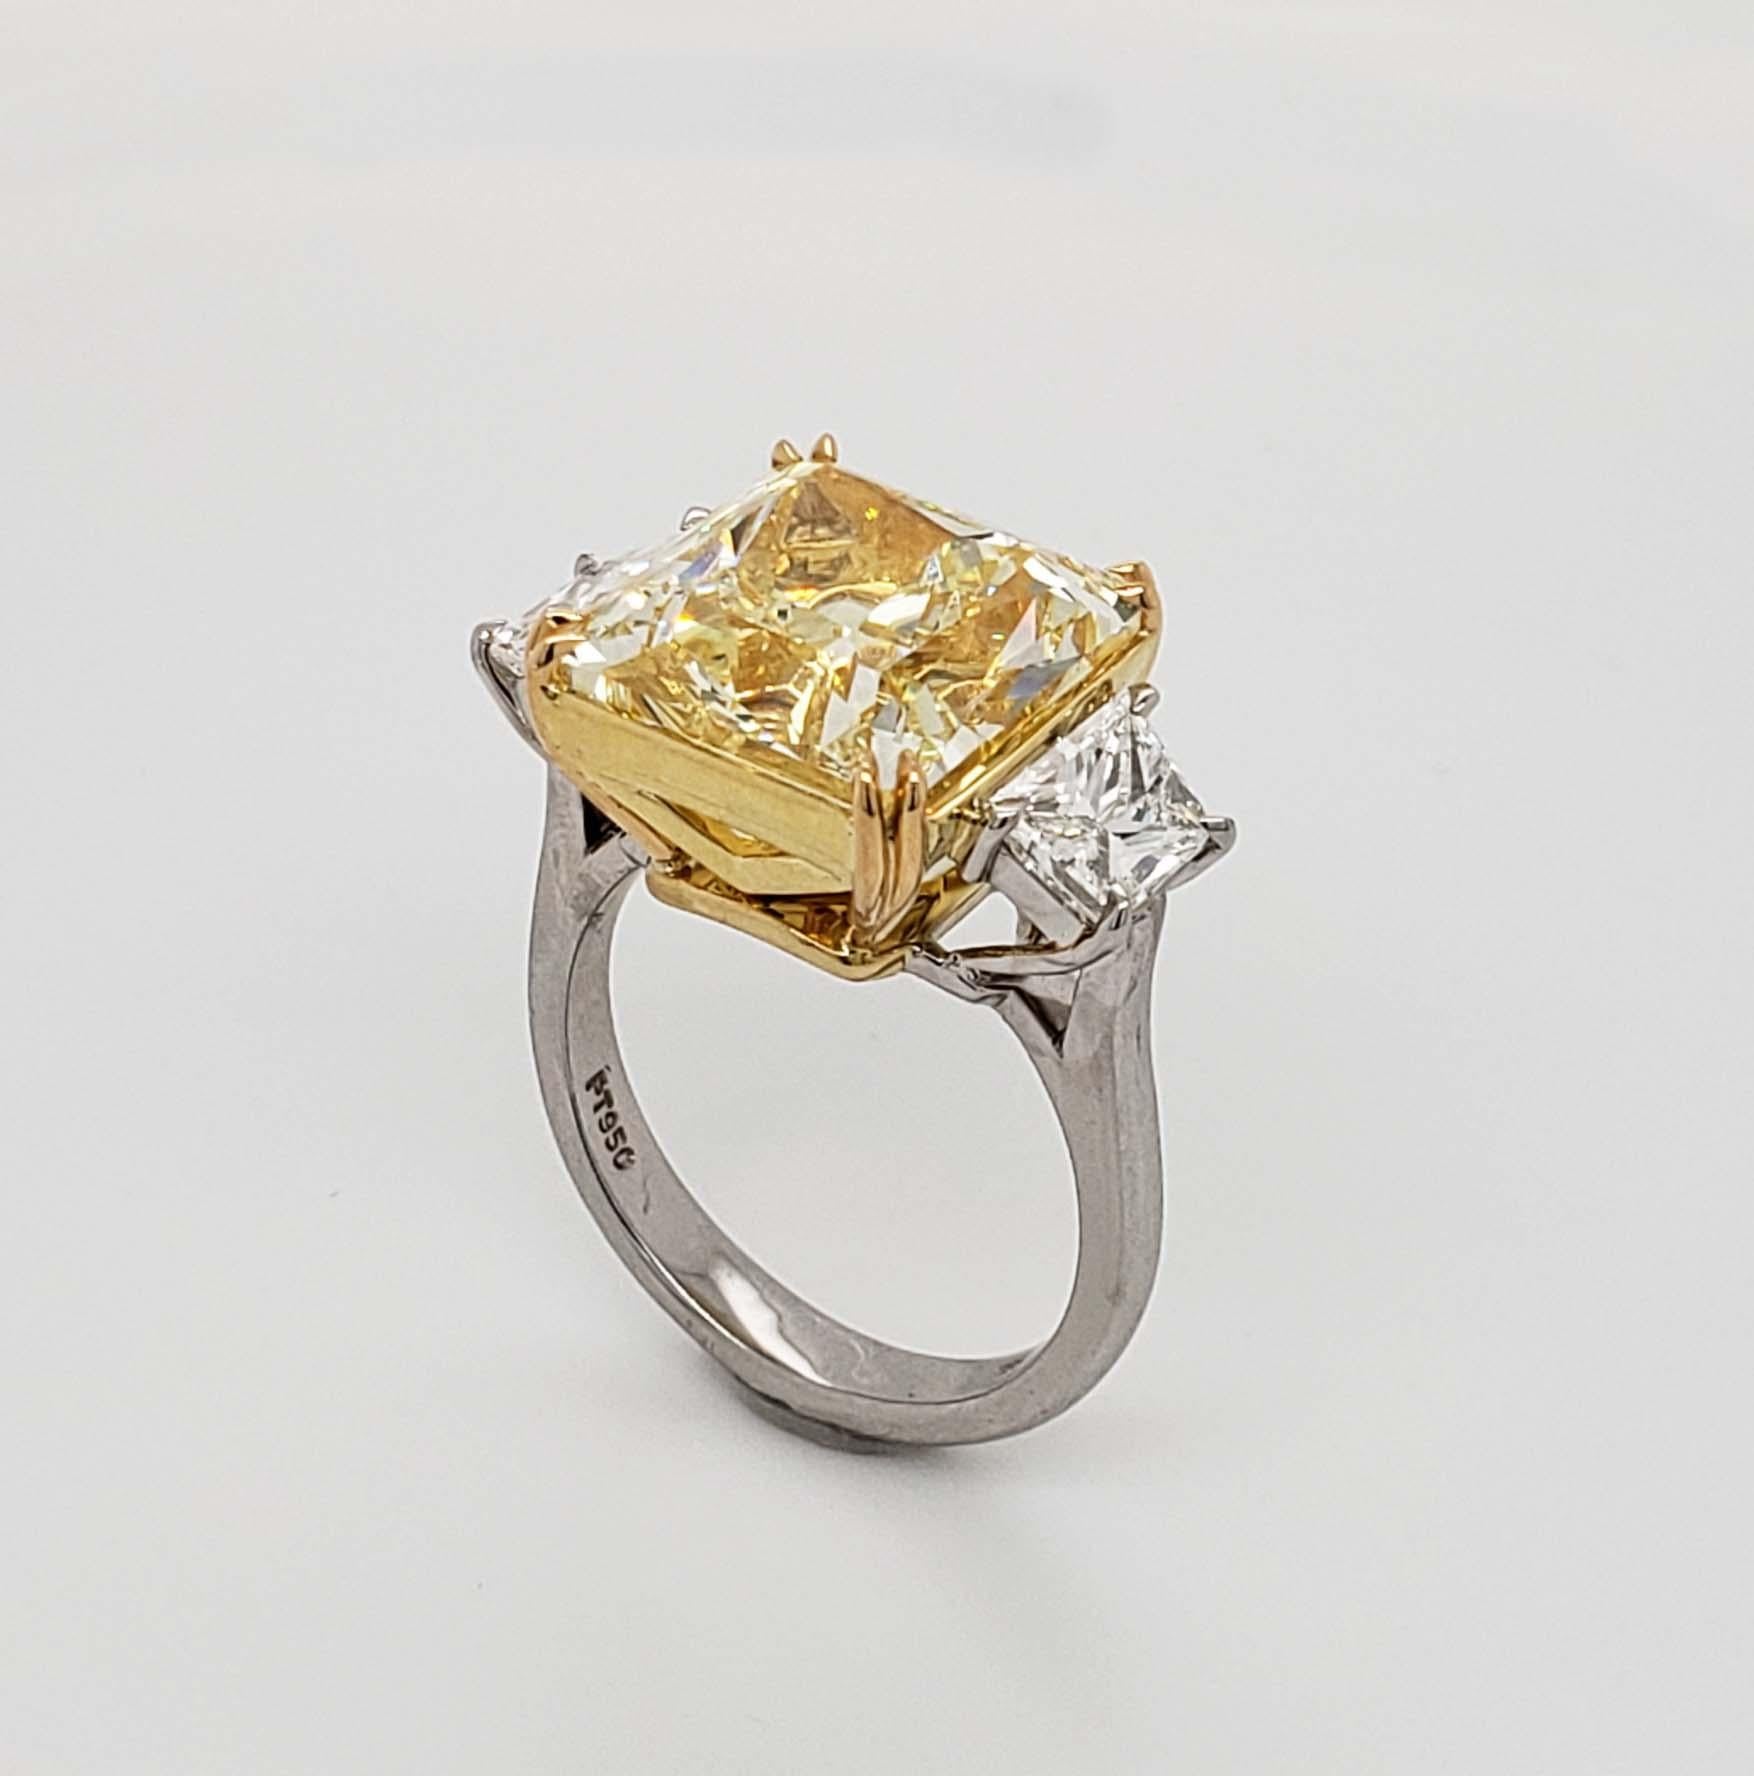 From SCARSELLI this 11.21 carat Fancy Yellow Radiant Cut Diamond is VS1 clarity and flanked by white brilliant cut tapered diamonds (2=1.02 carat) in a handmade platinum ring.  Wonderfully tailored, this ring transitions from day to evening